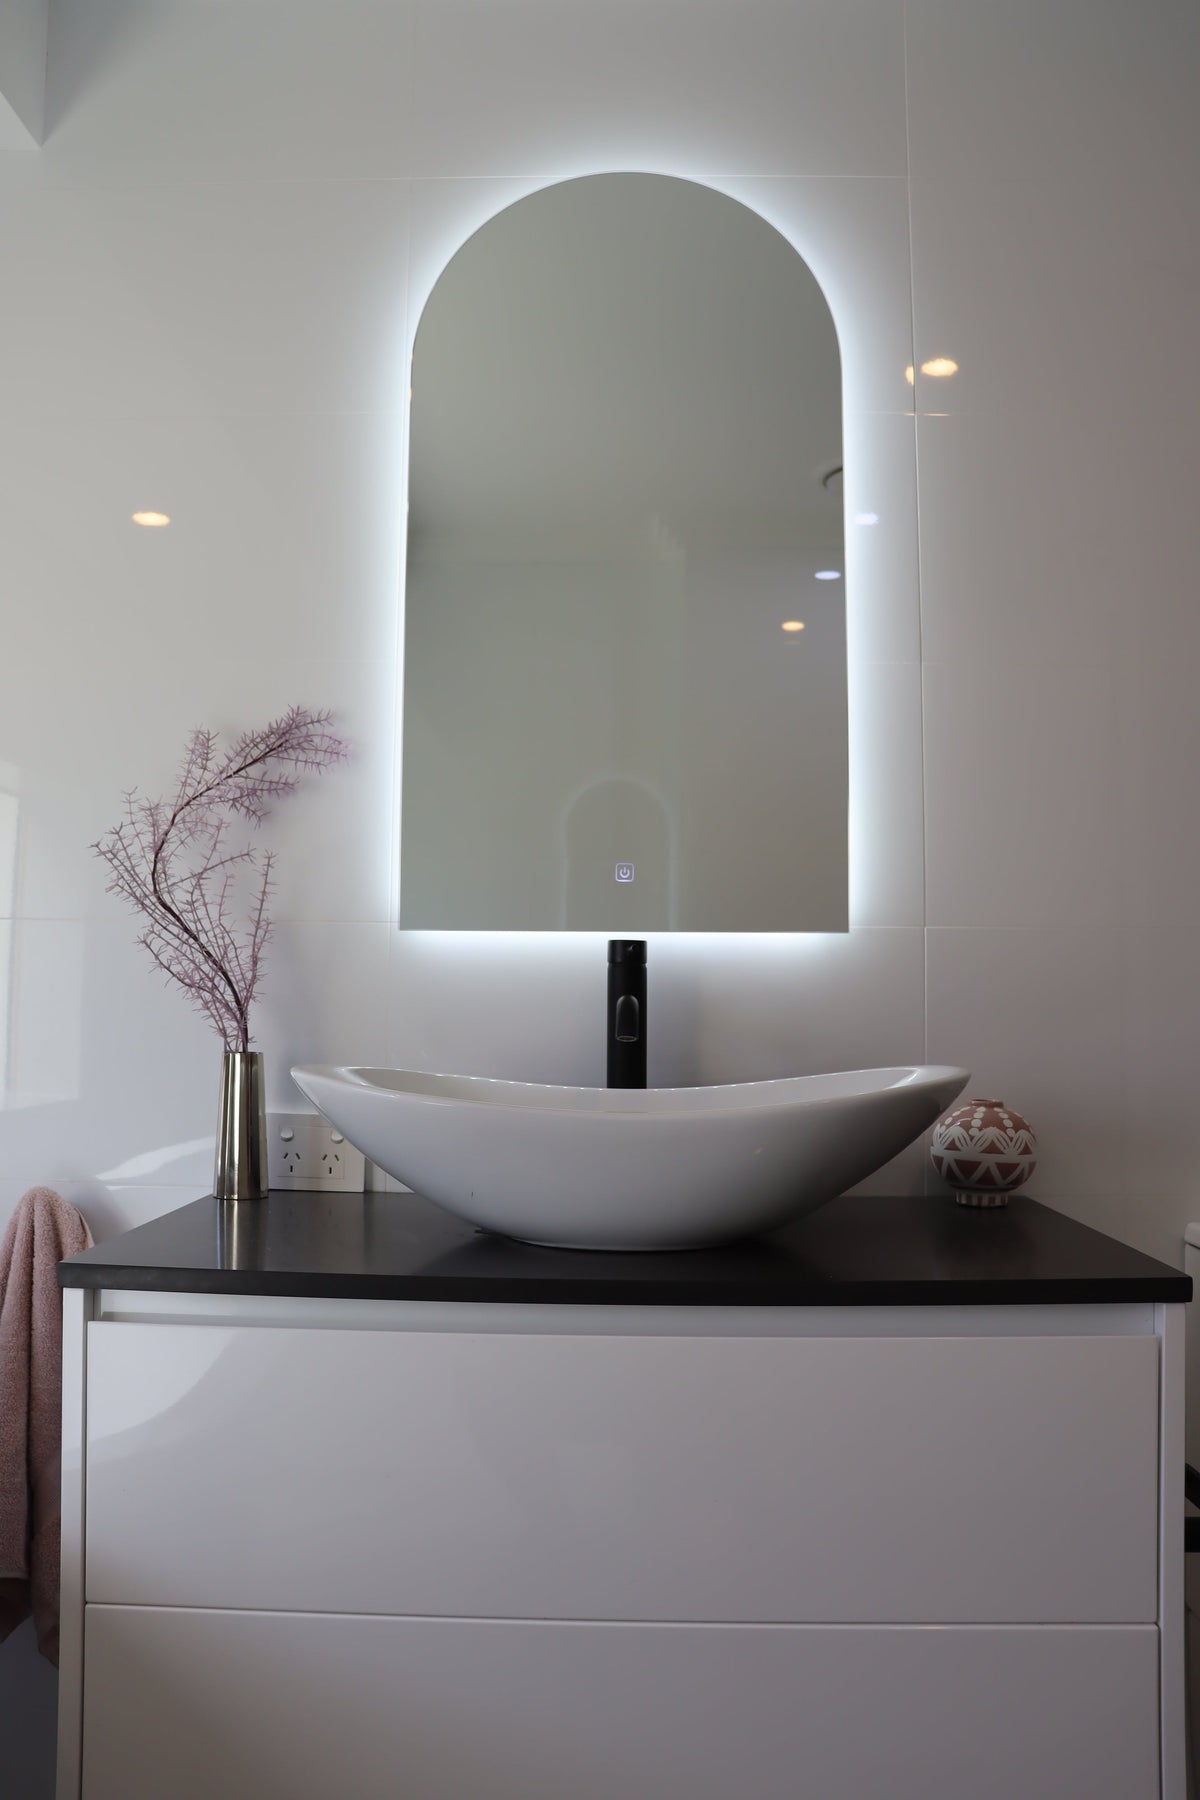 Vanity Space in White Glossy Bathroom with Lighted Arch-Shaped Backlit LED Mirror